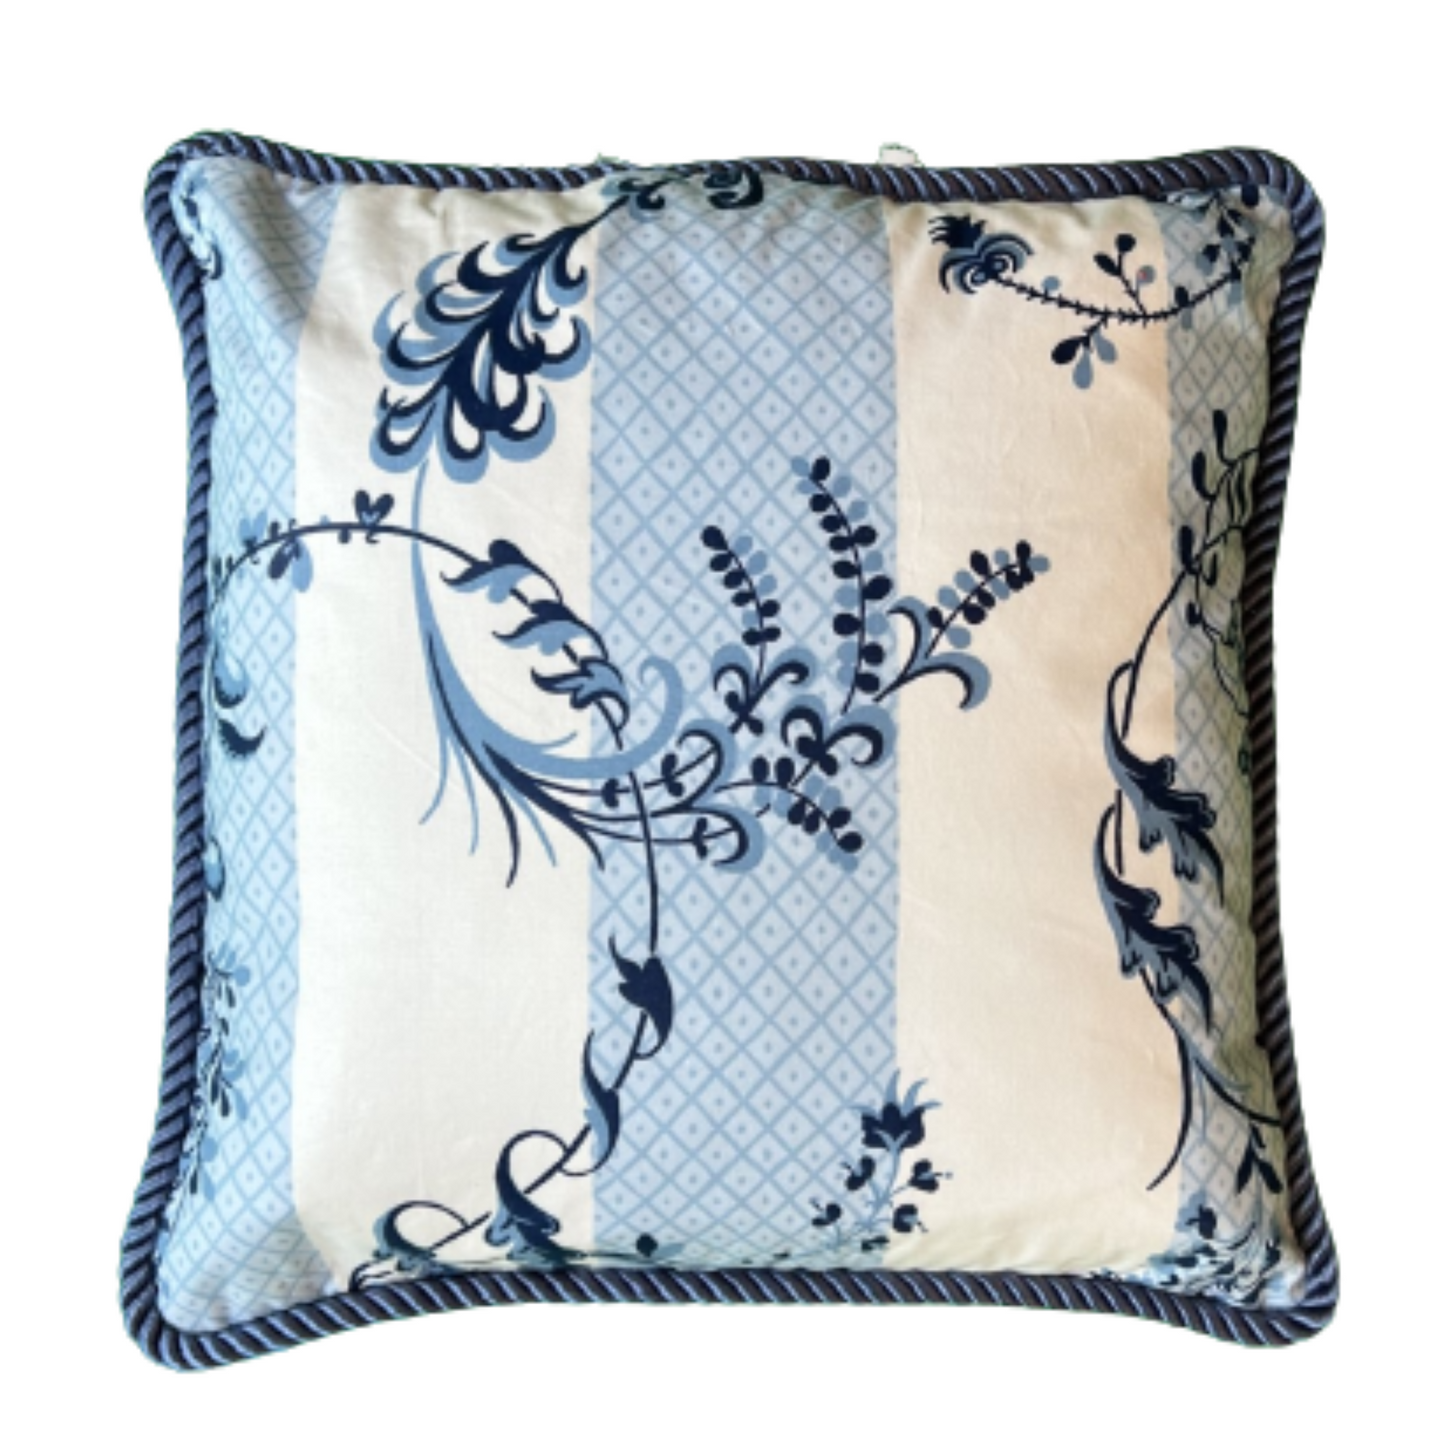 Bagatelle Pillow Front Serene Blue and White Trellis and Vine Stripe Decorative Toss Pillow 15 X 15 Square with Down Feather Insert